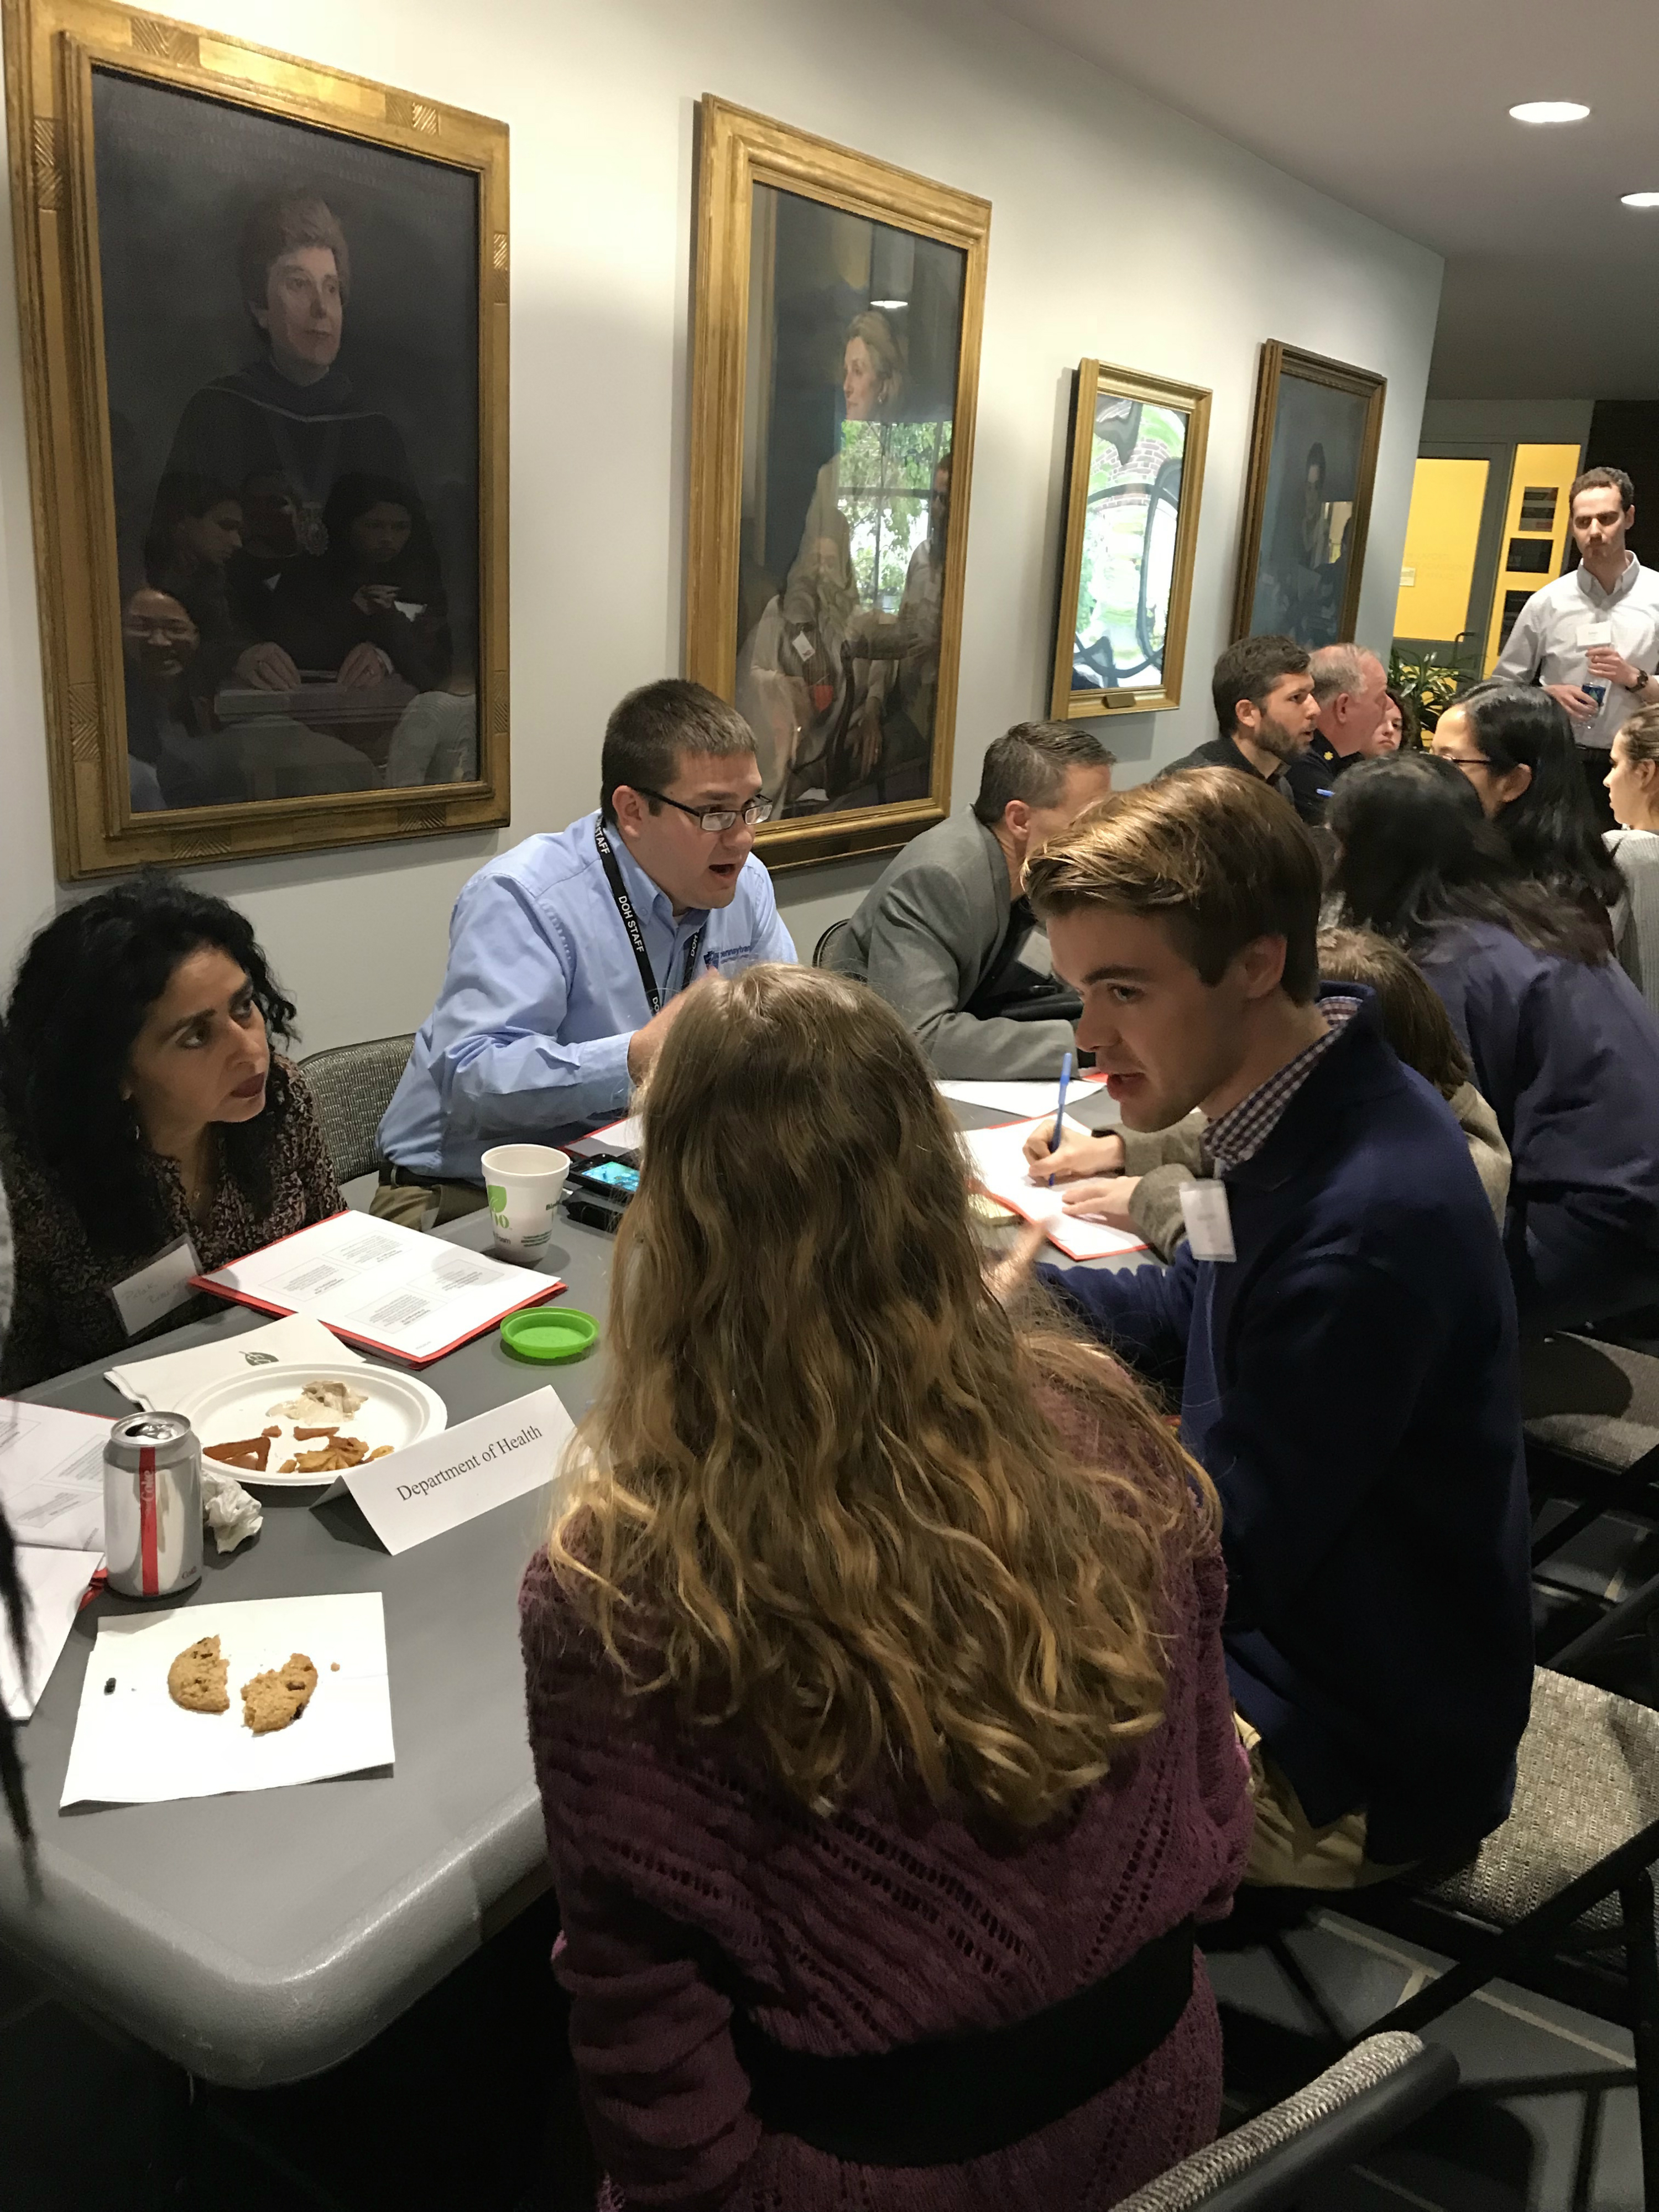 Students talk with experts in public health at tables